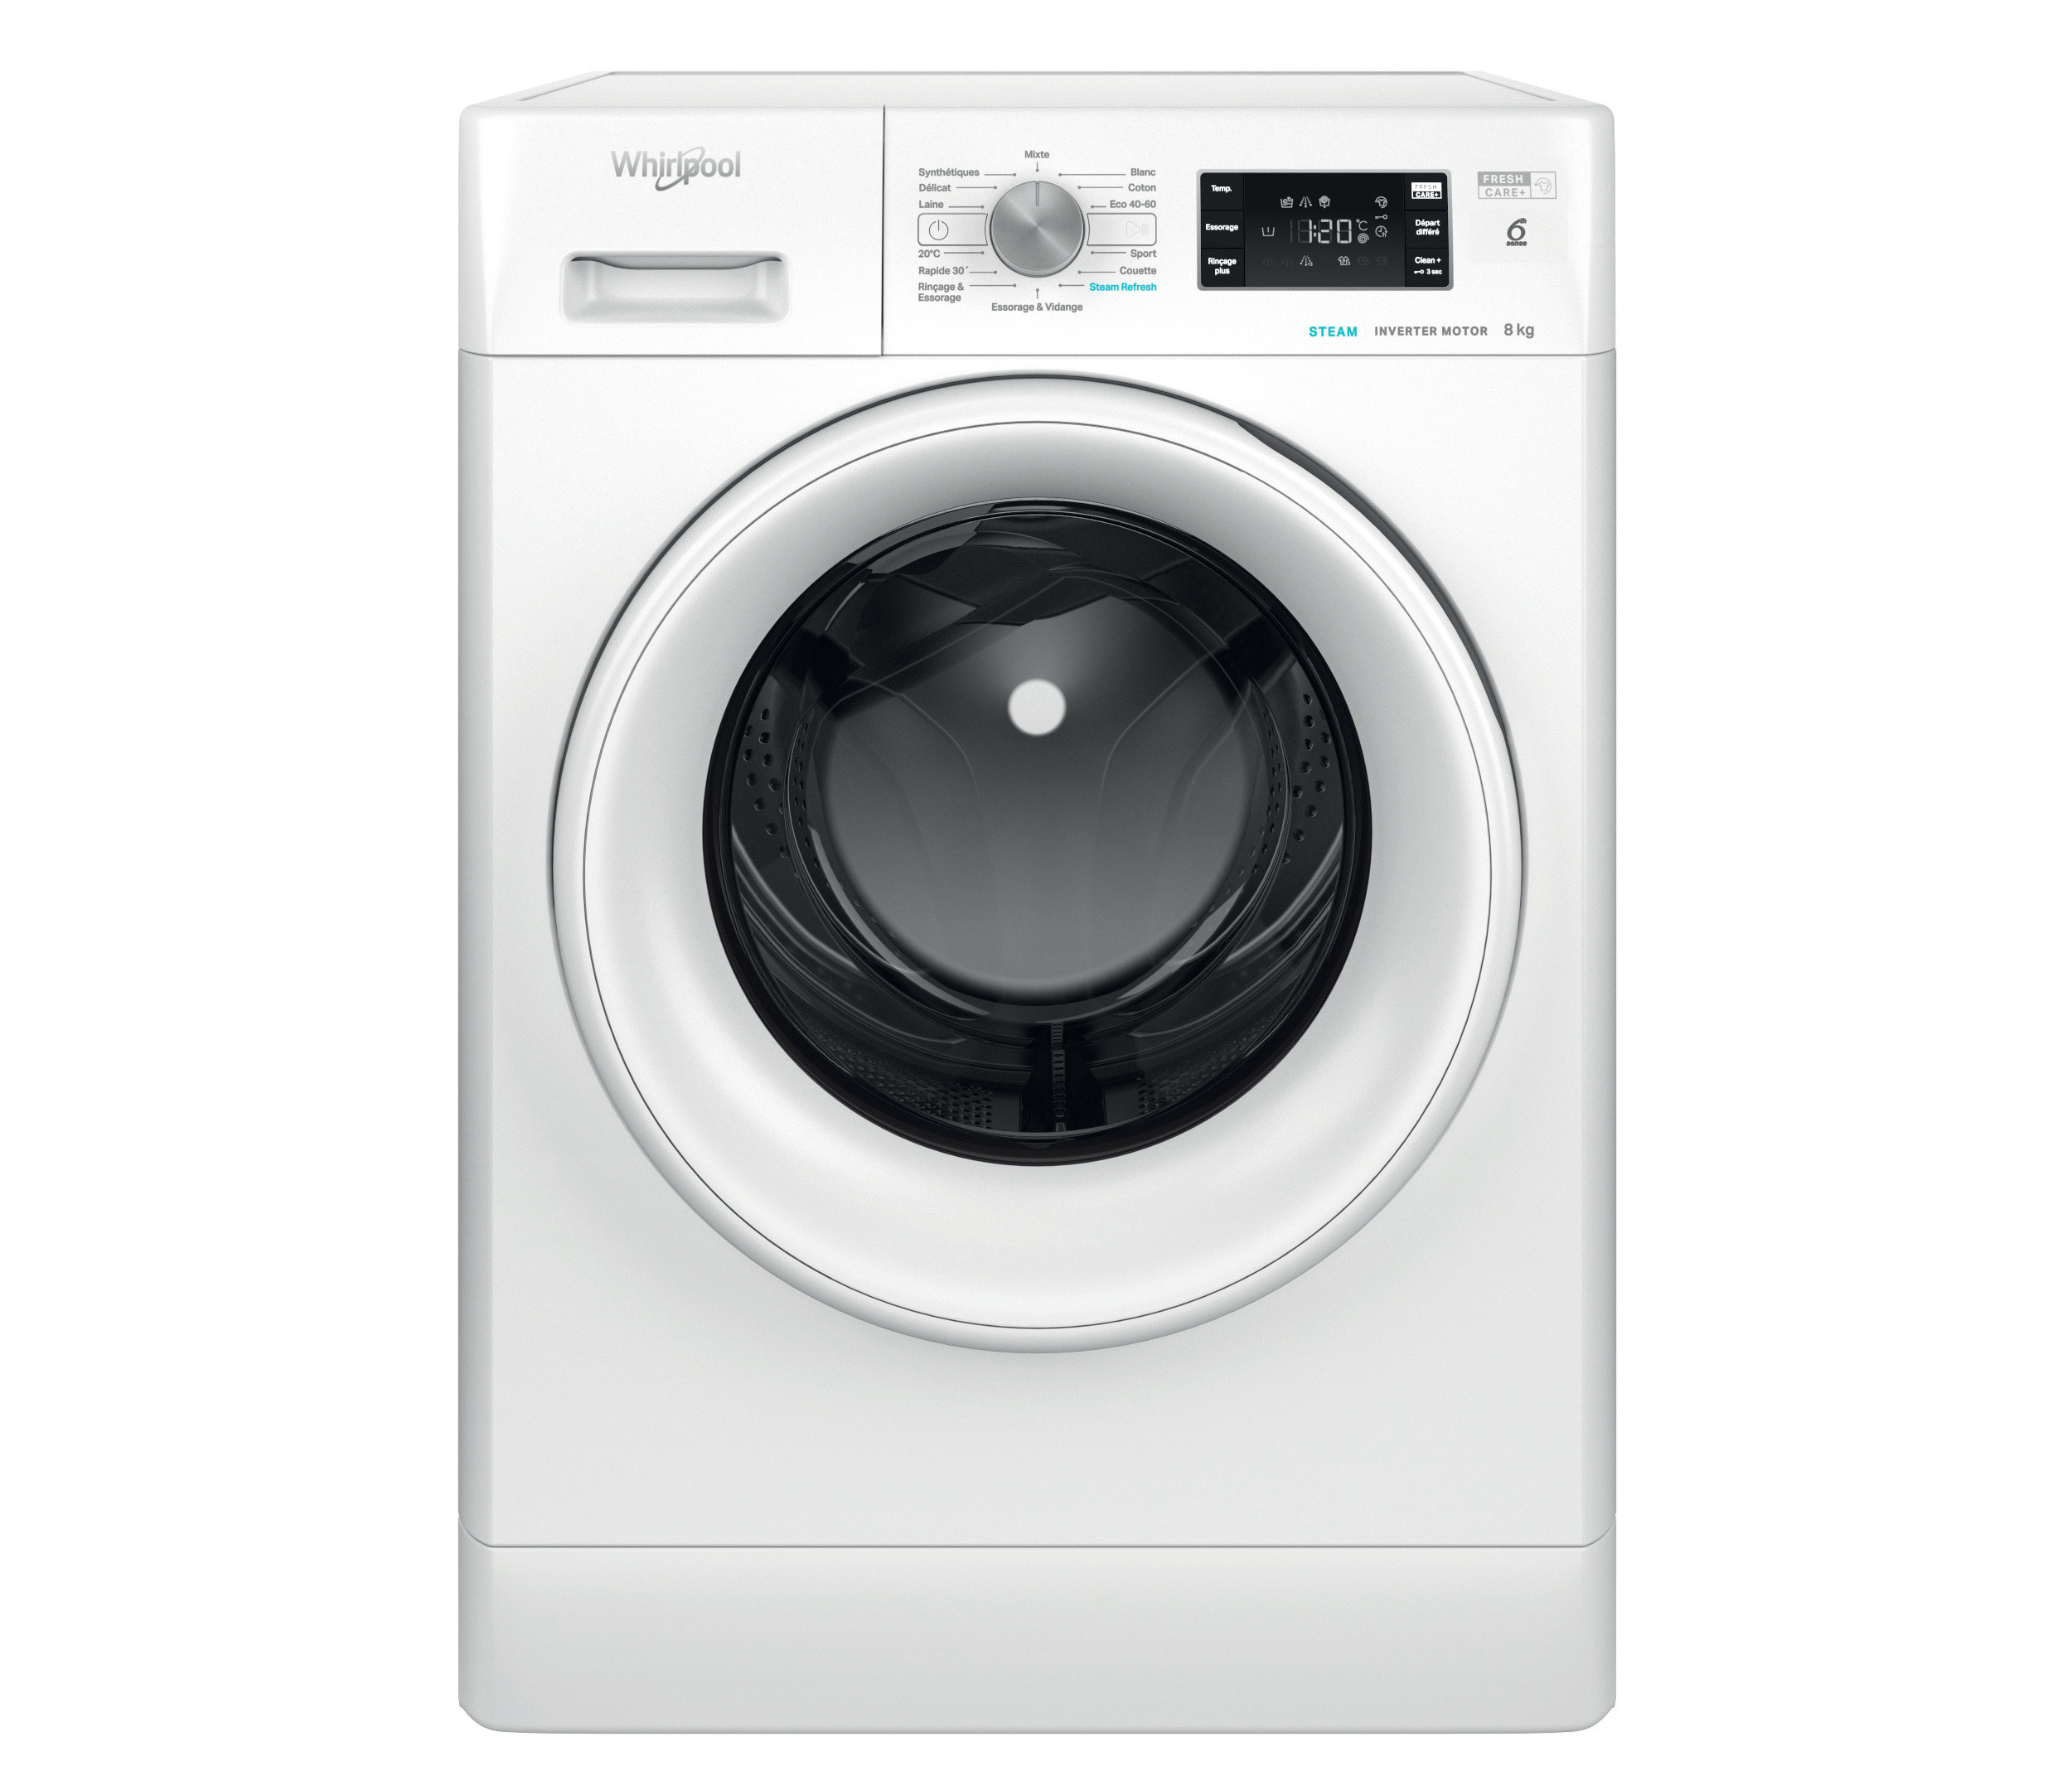 Achat LAVE LINGE WHIRLPOOL occasion - Marseille